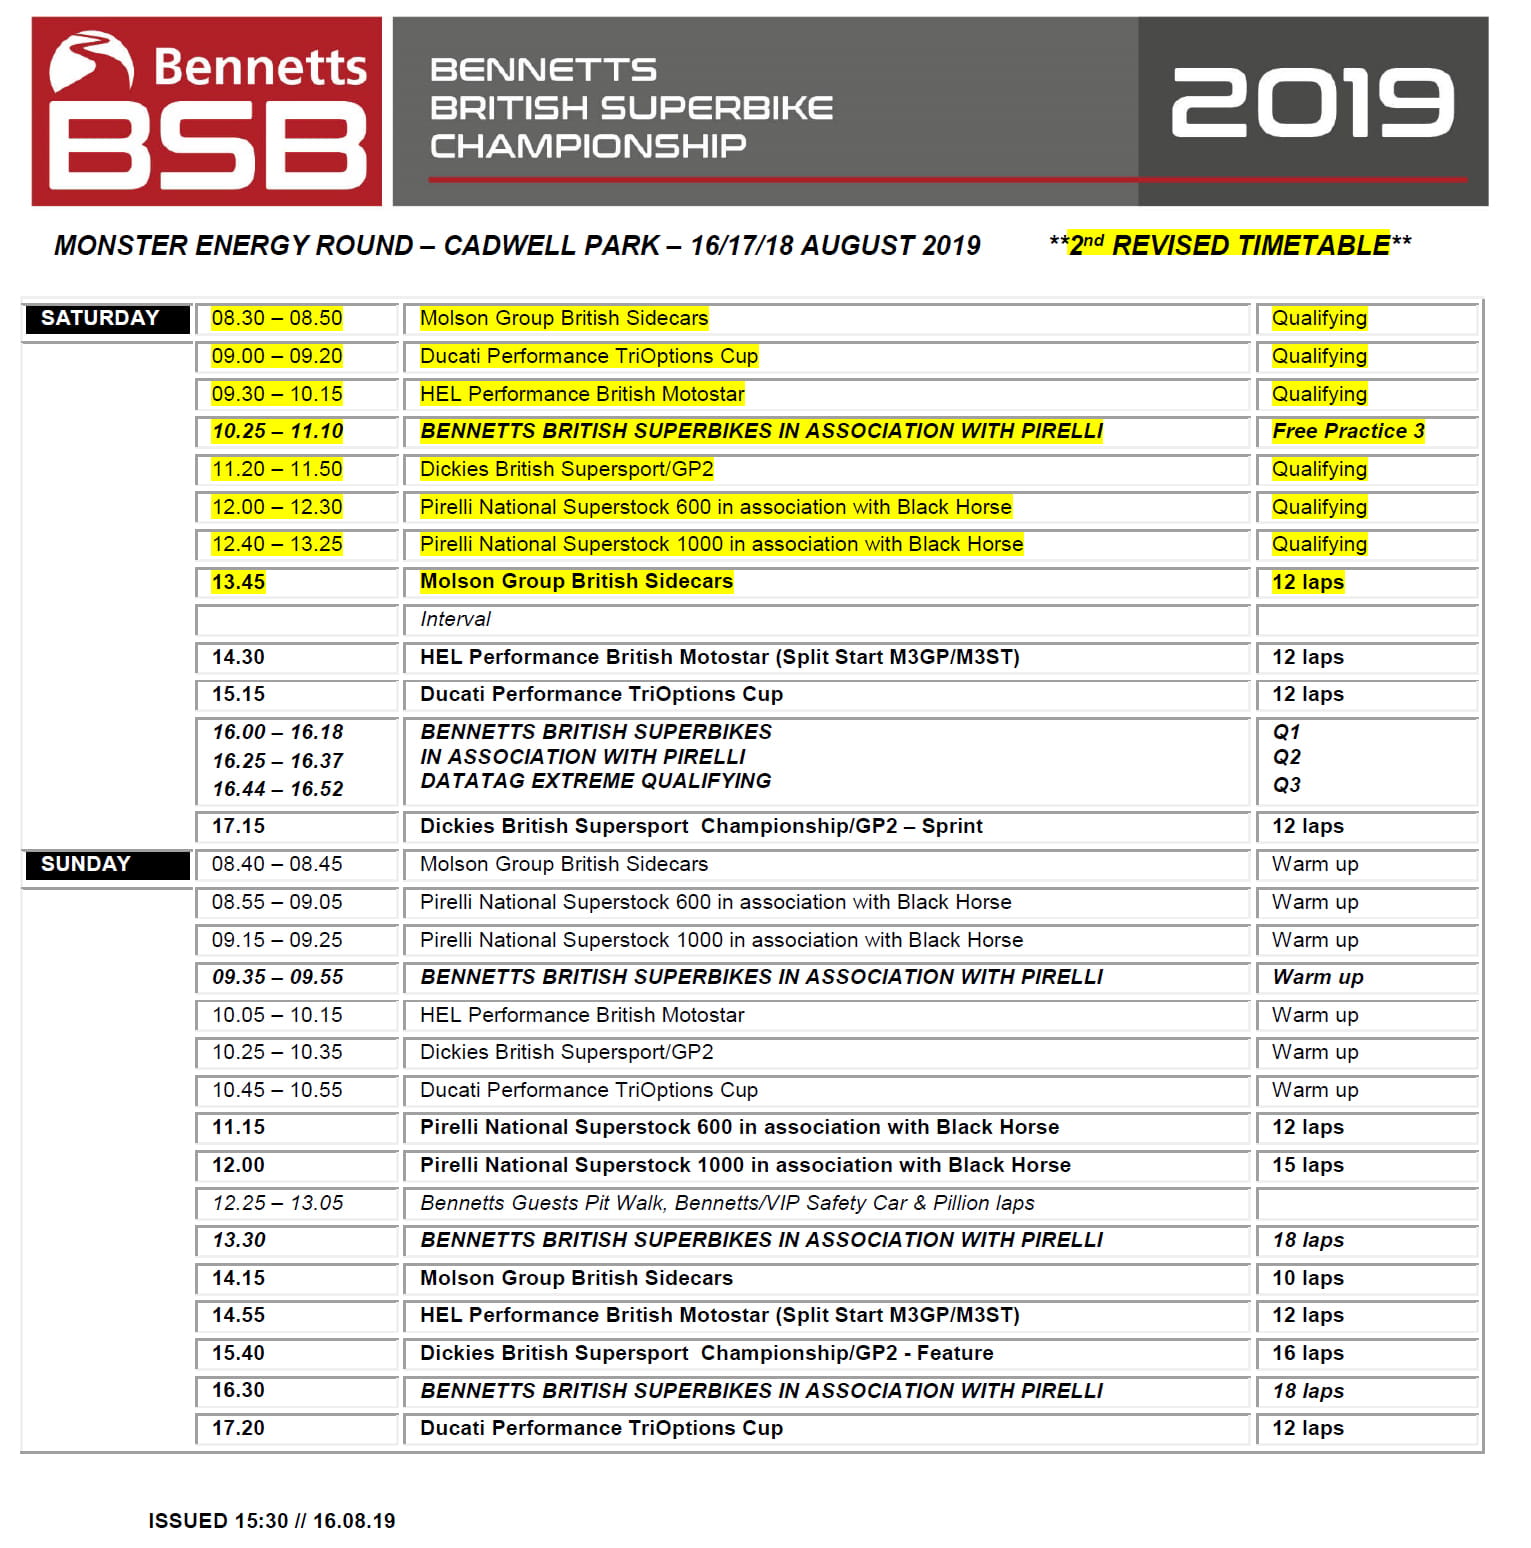 BSB 2019 Cadwell Revised Schedule Rev 2